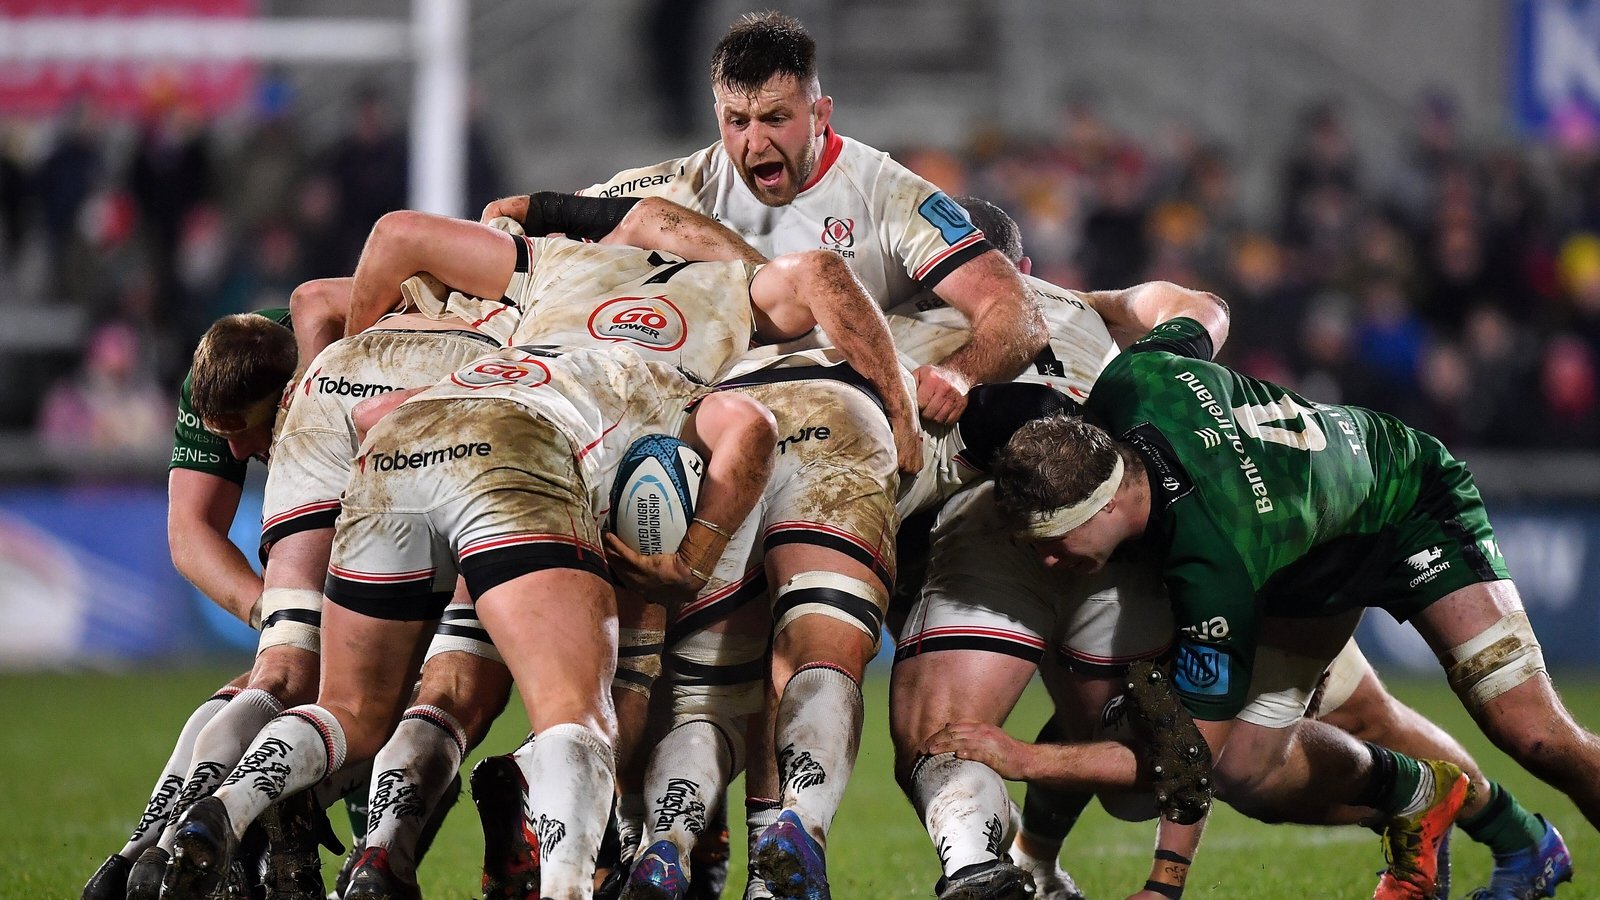 Ulster pack gives them the edge over Munster